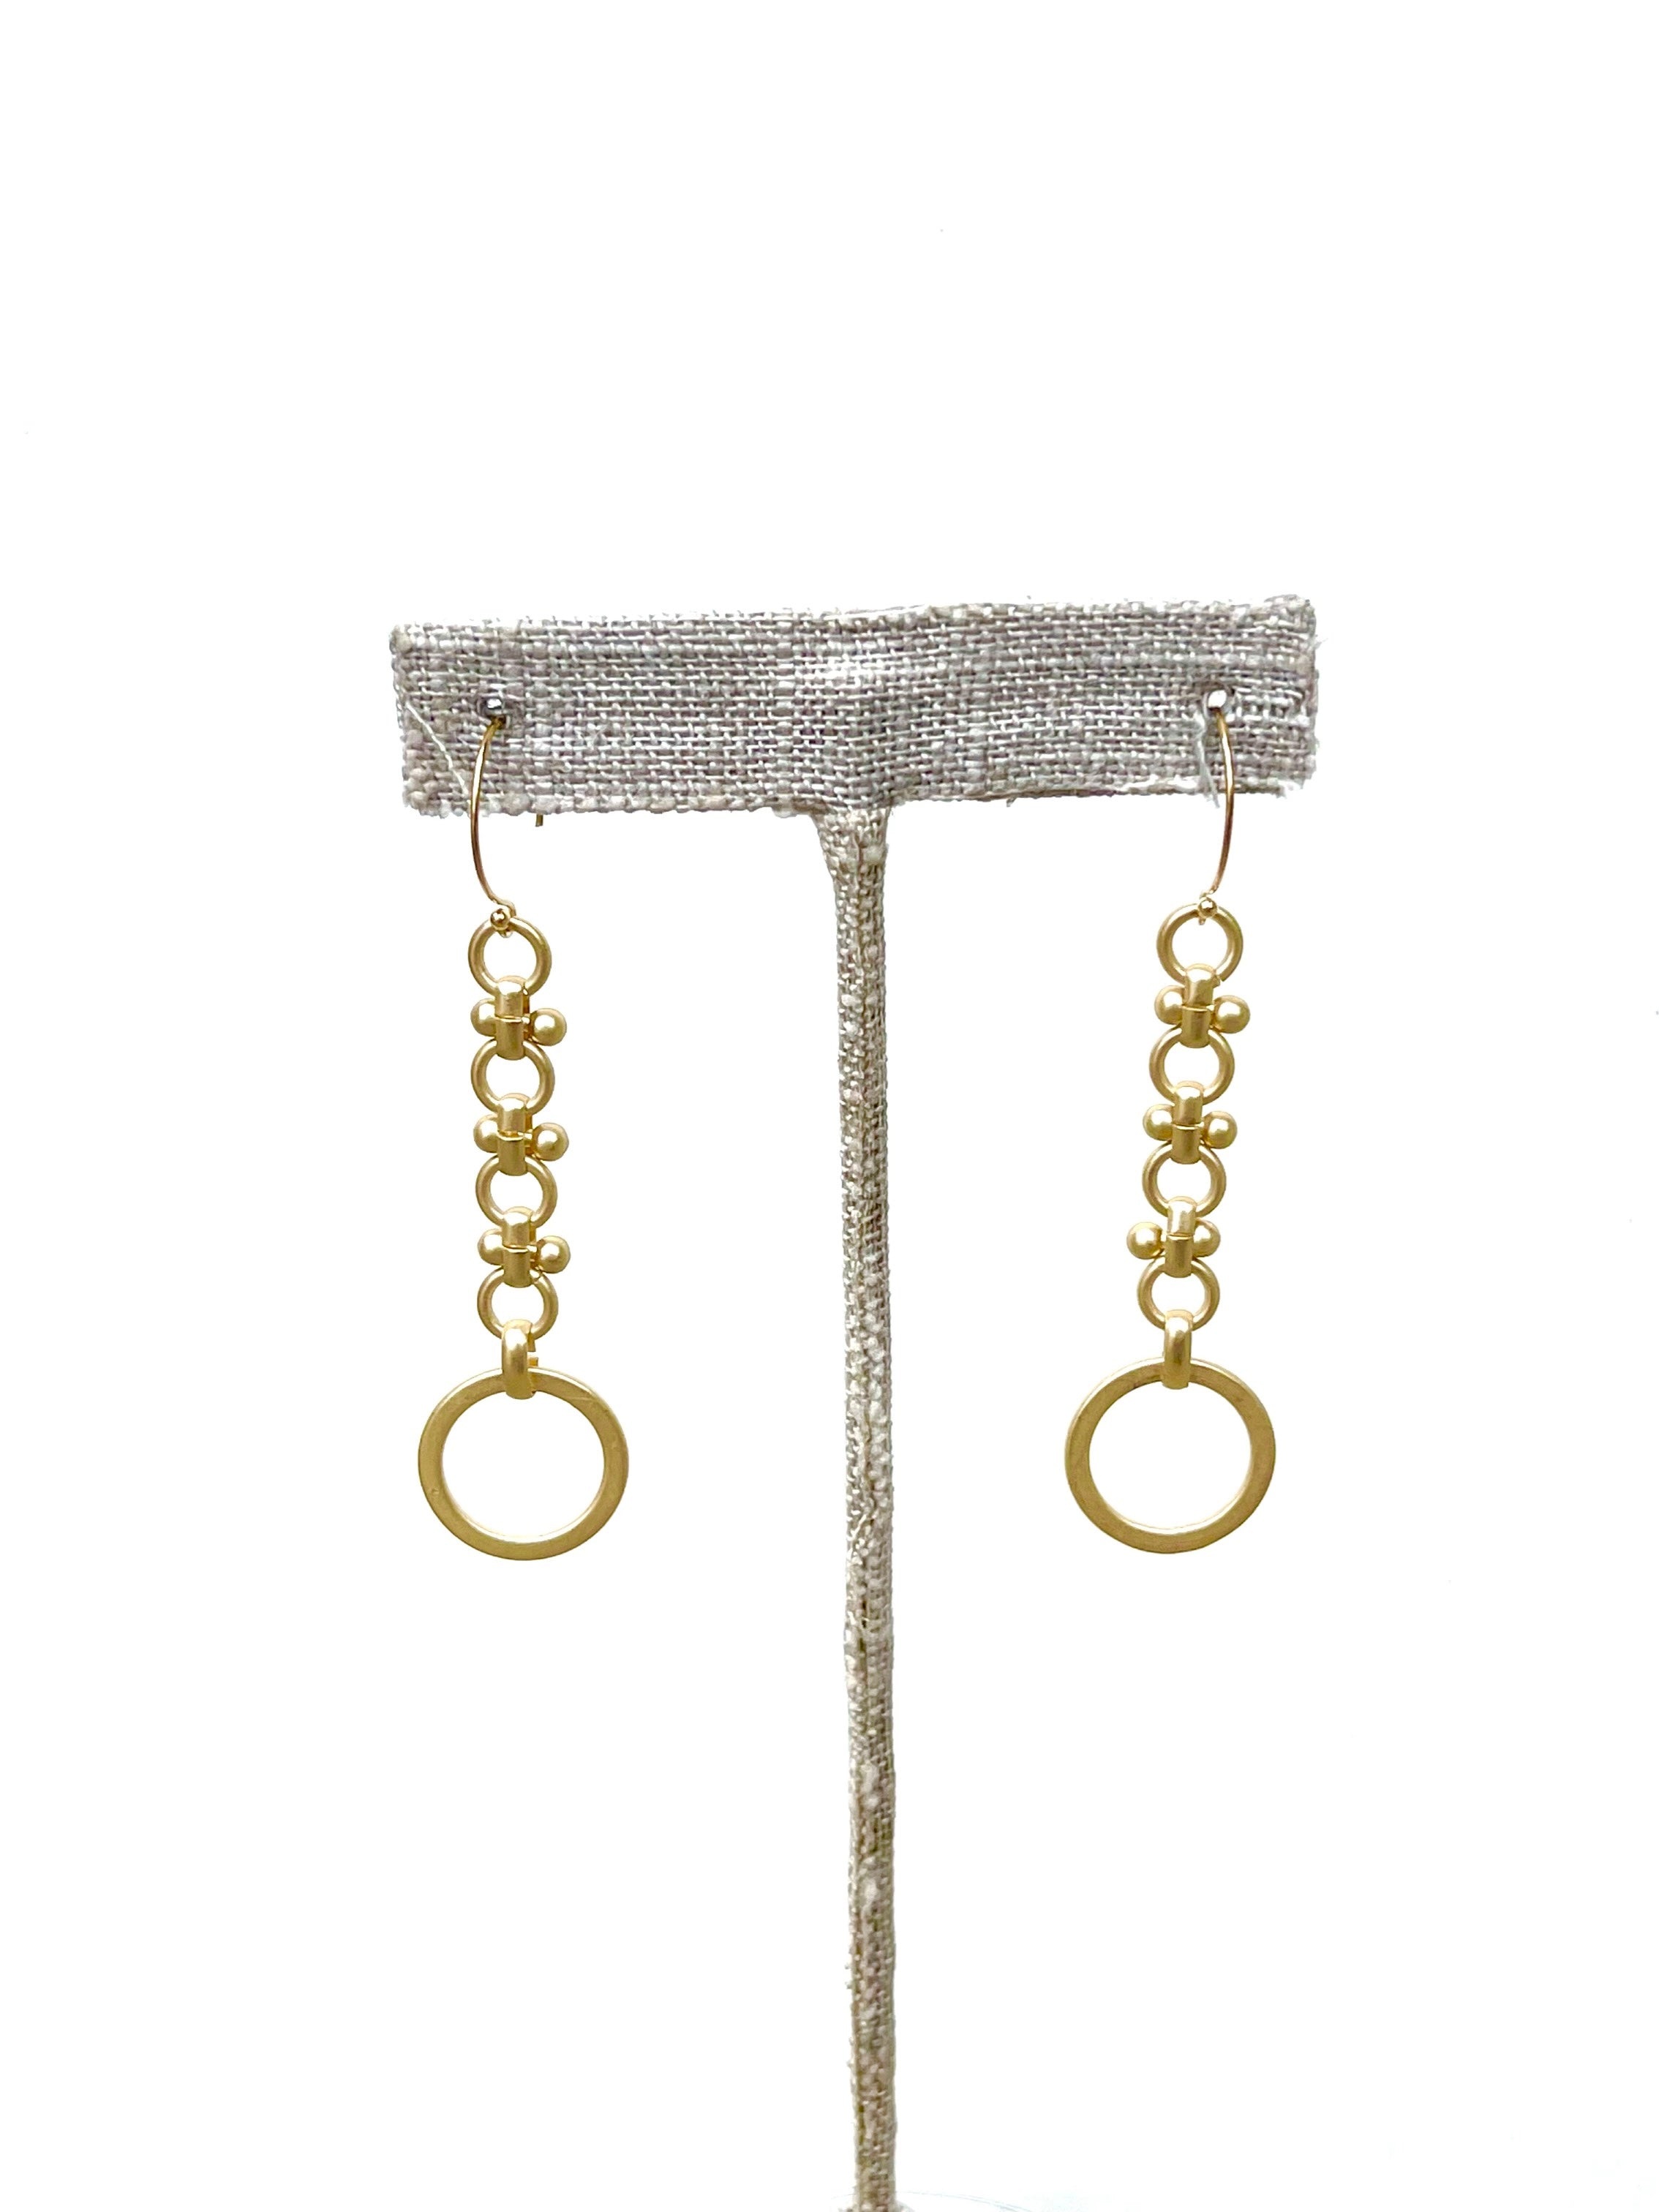 Coco - earrings with luxe chain